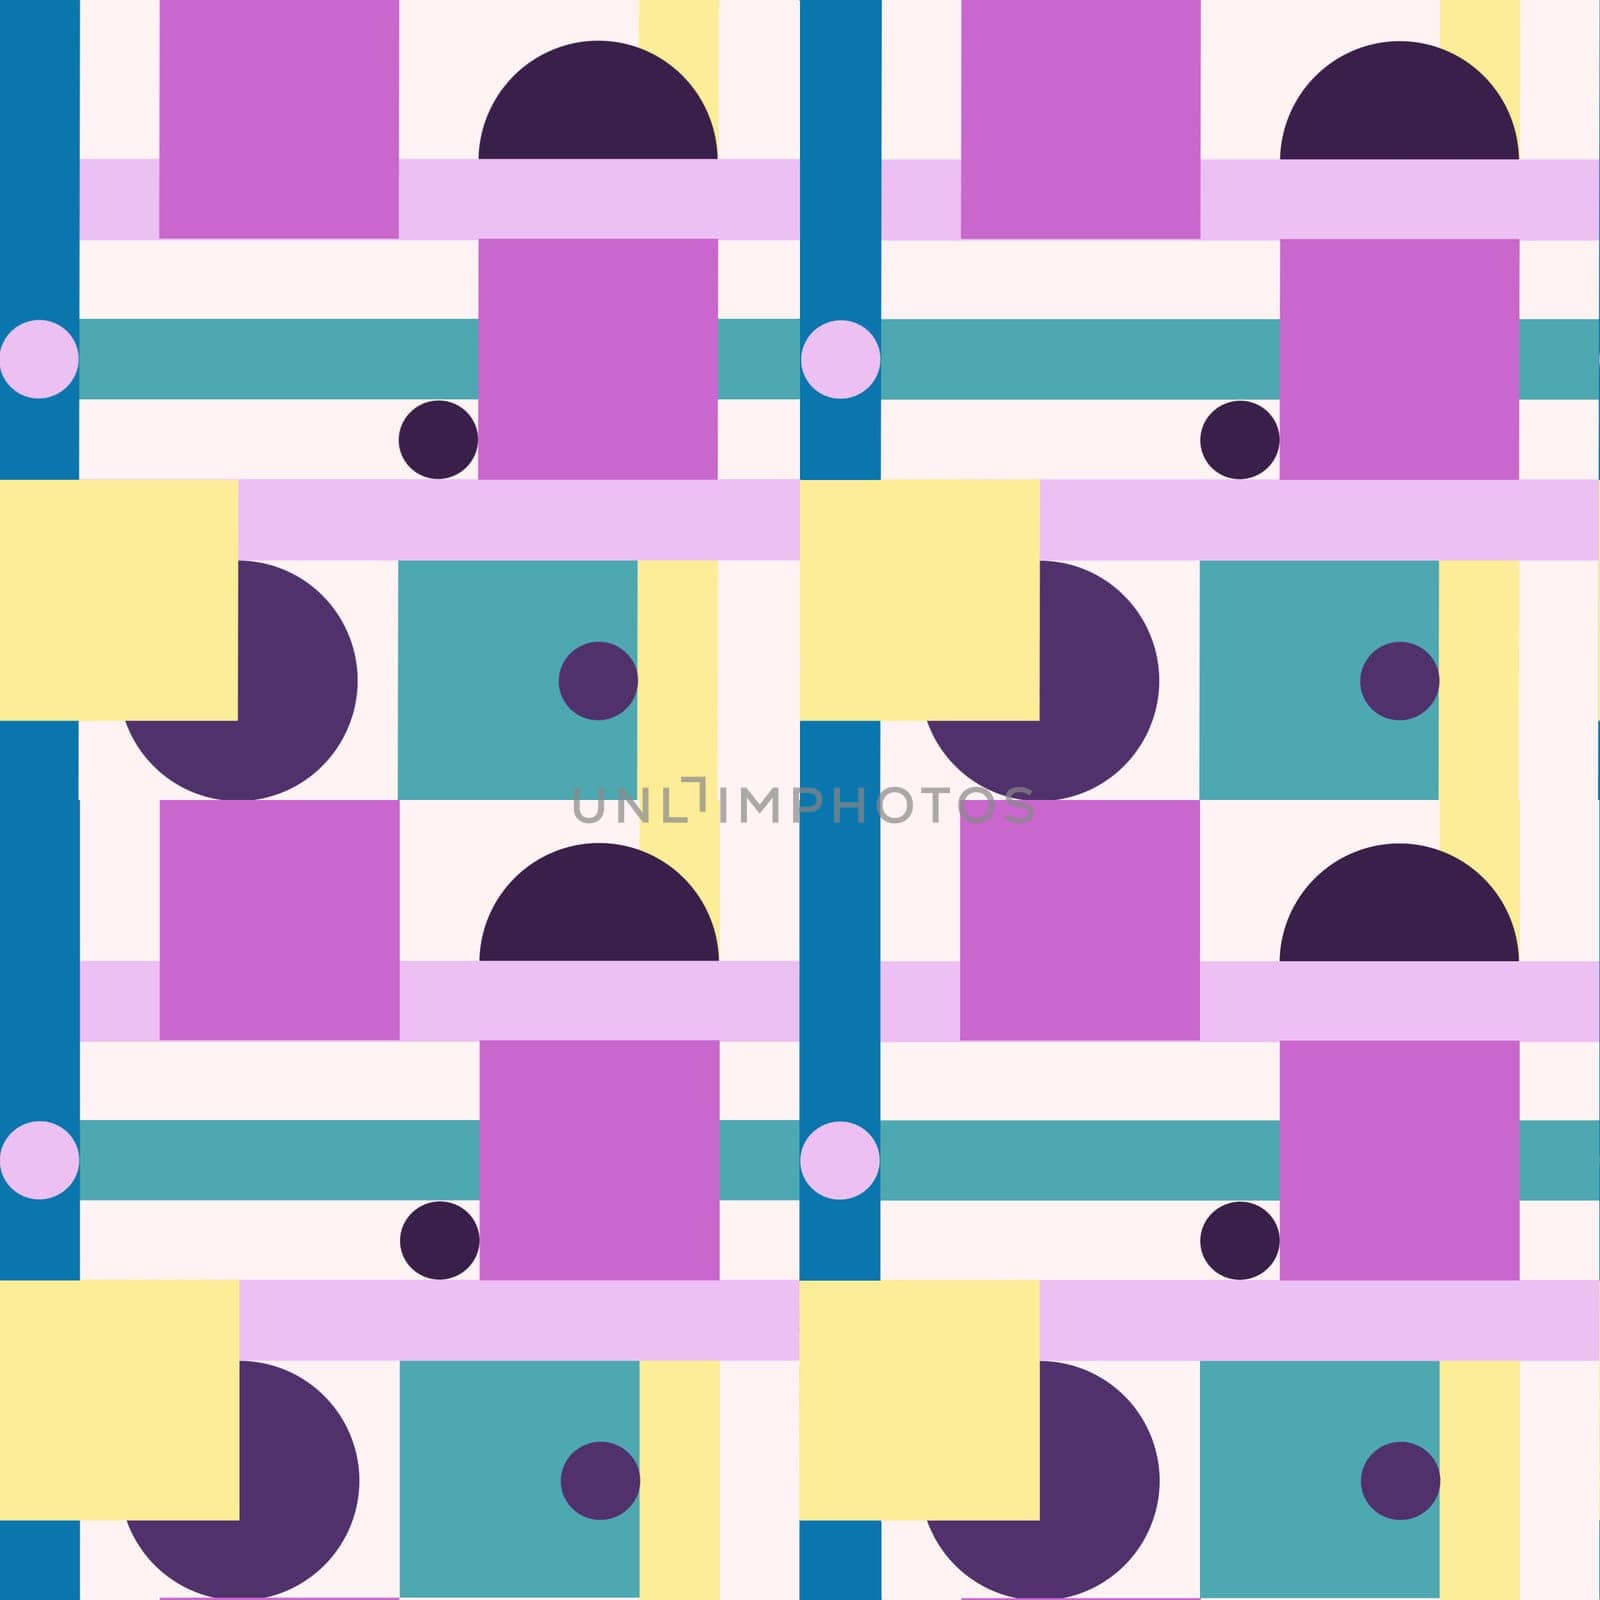 Hand drawn seamless pattern in abstract geometric style, purple blue turquoise yellow shapes squares lines circles. Mid century modern bauhaus print, 60s 70s poster wallpaper decor, colorful bright design in memphis ornament